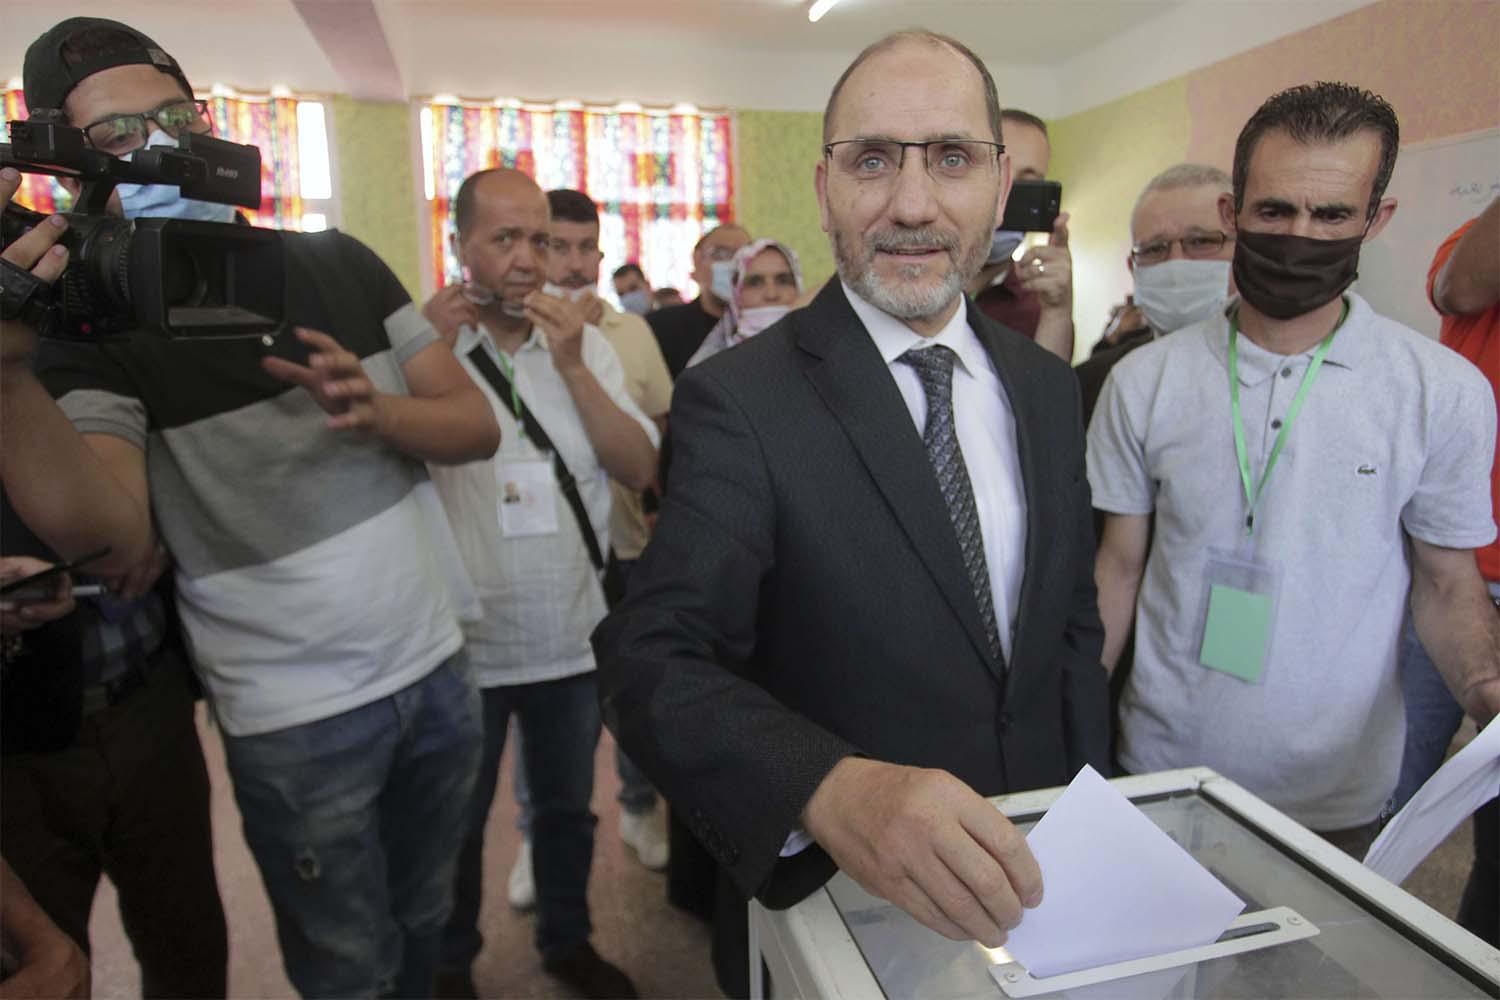 Abderrazak Makri denounced alleged fraud attempts to change the election results